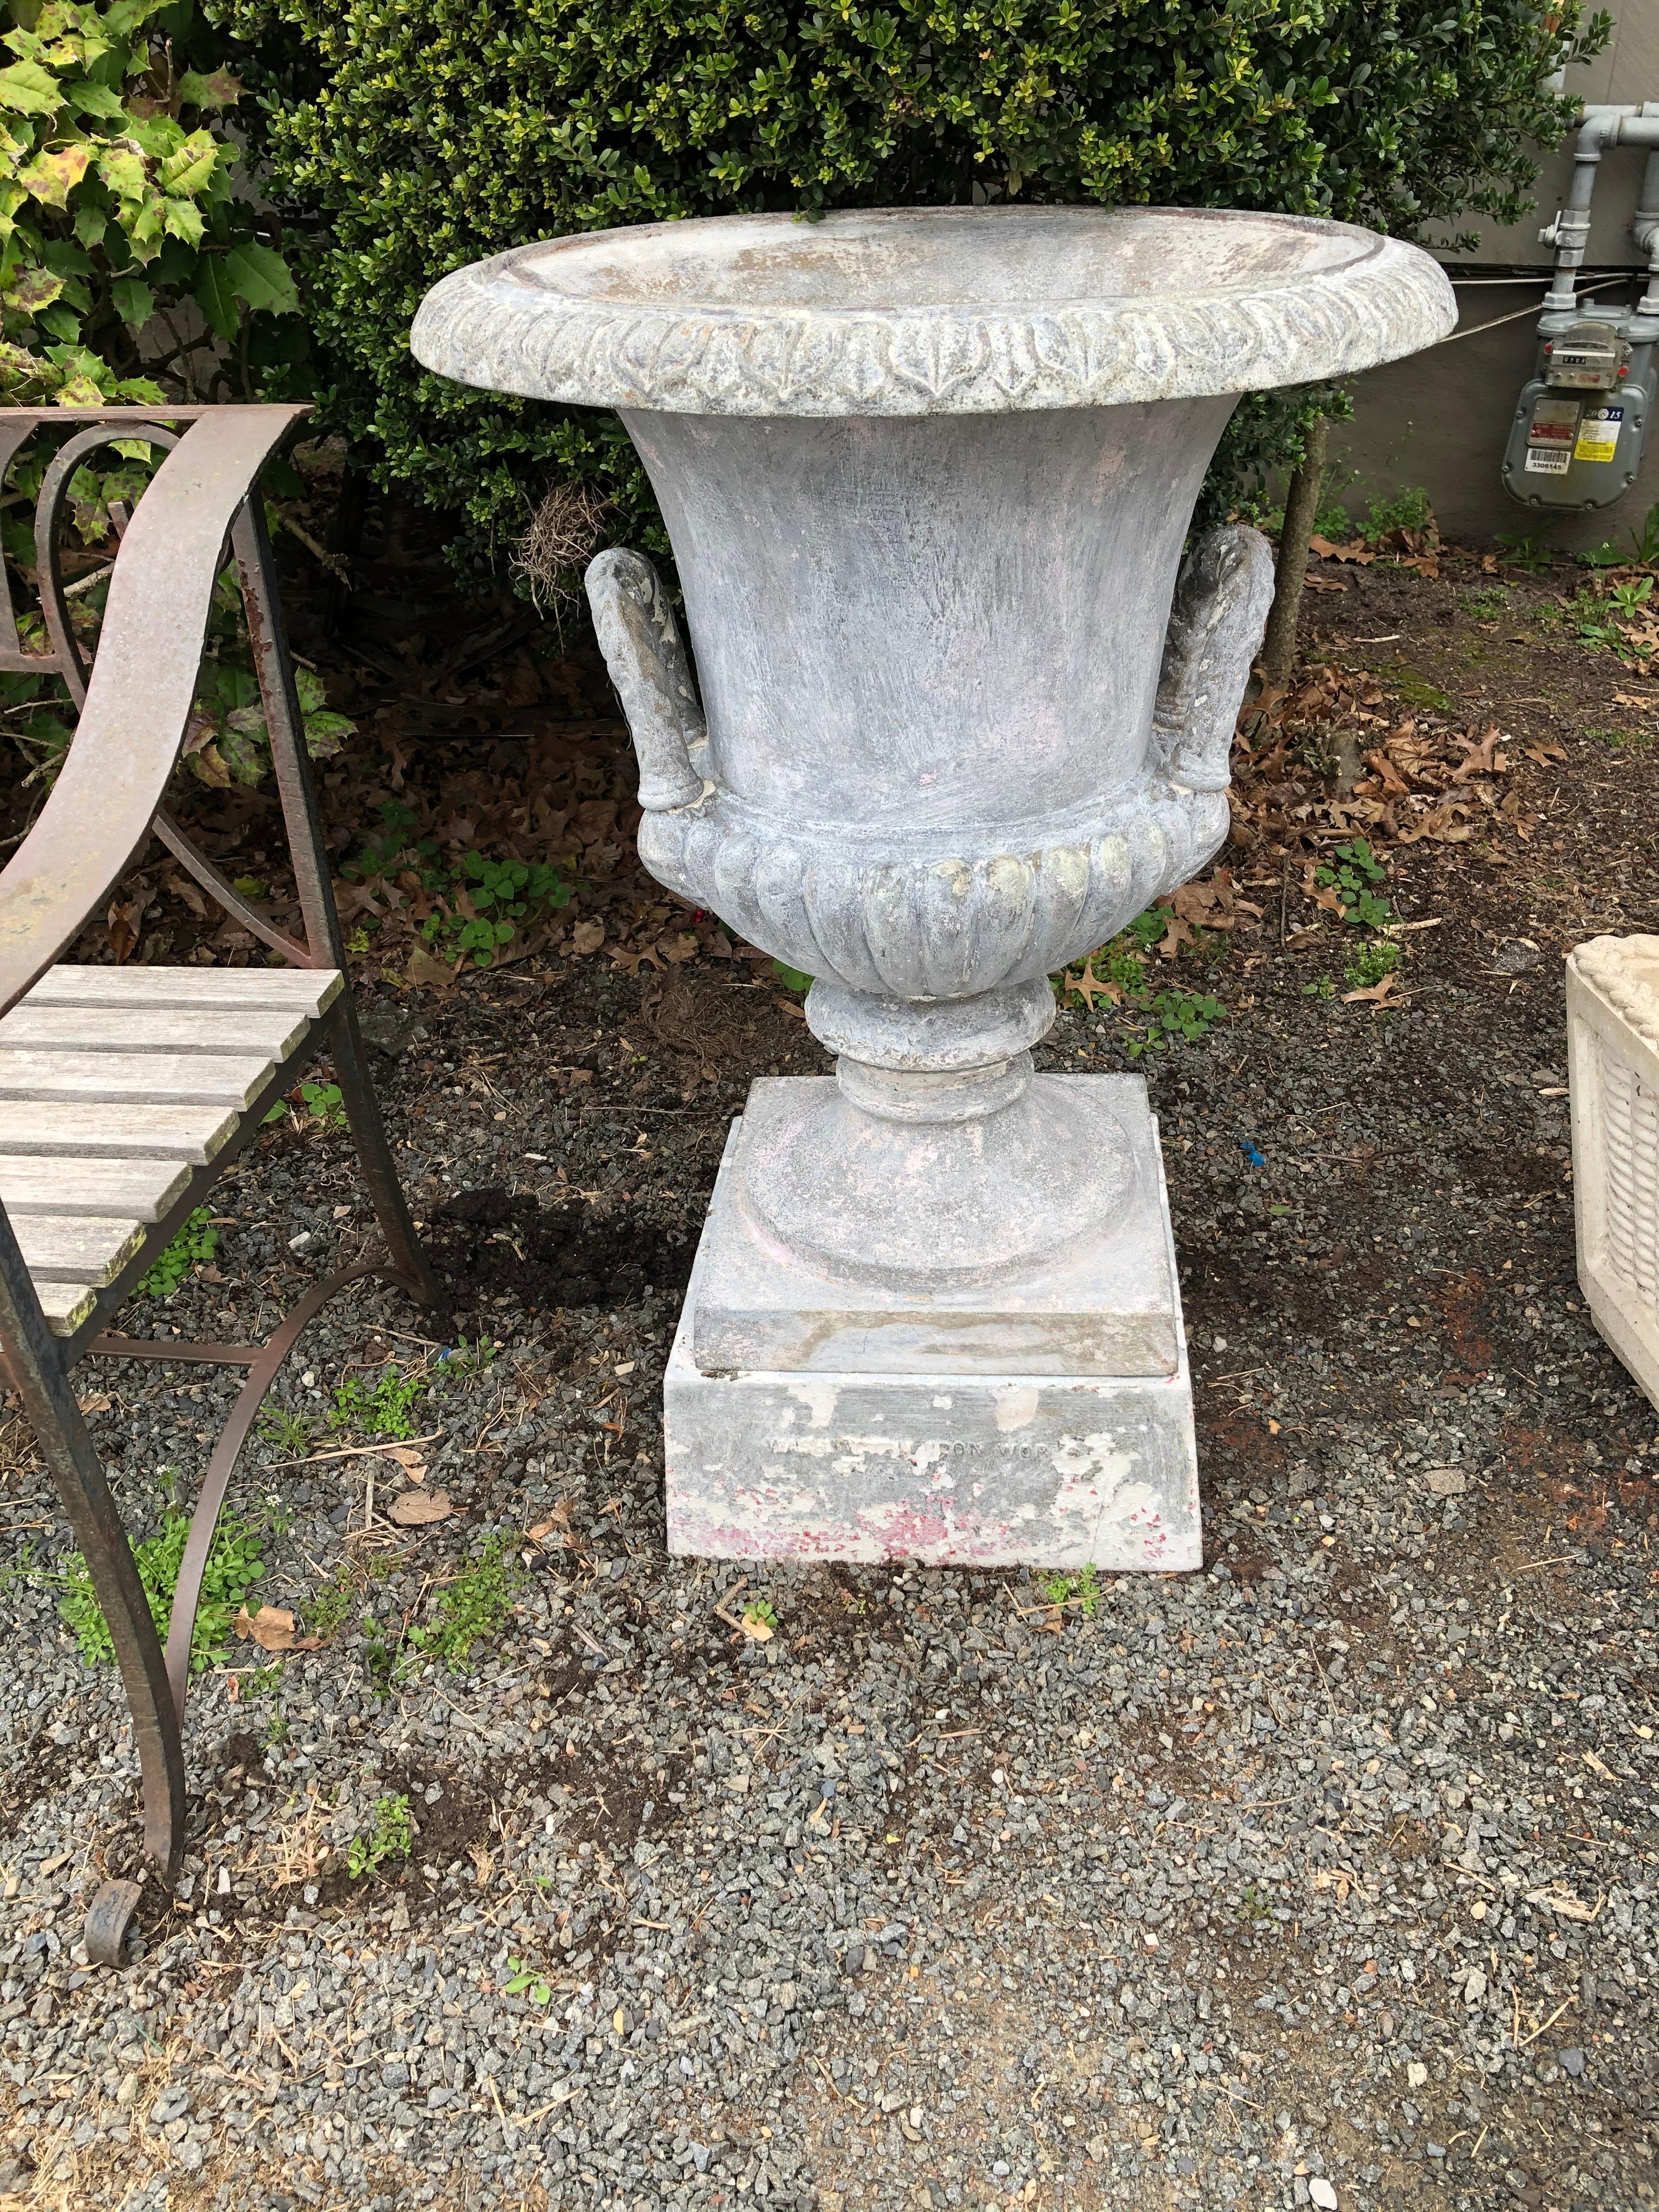 Gorgeous neoclassical style 19th century iron urn stamped Mott Iron Works with classic detailing and grey patina. Married to a plinth by a different maker.
Measures: Base is 15